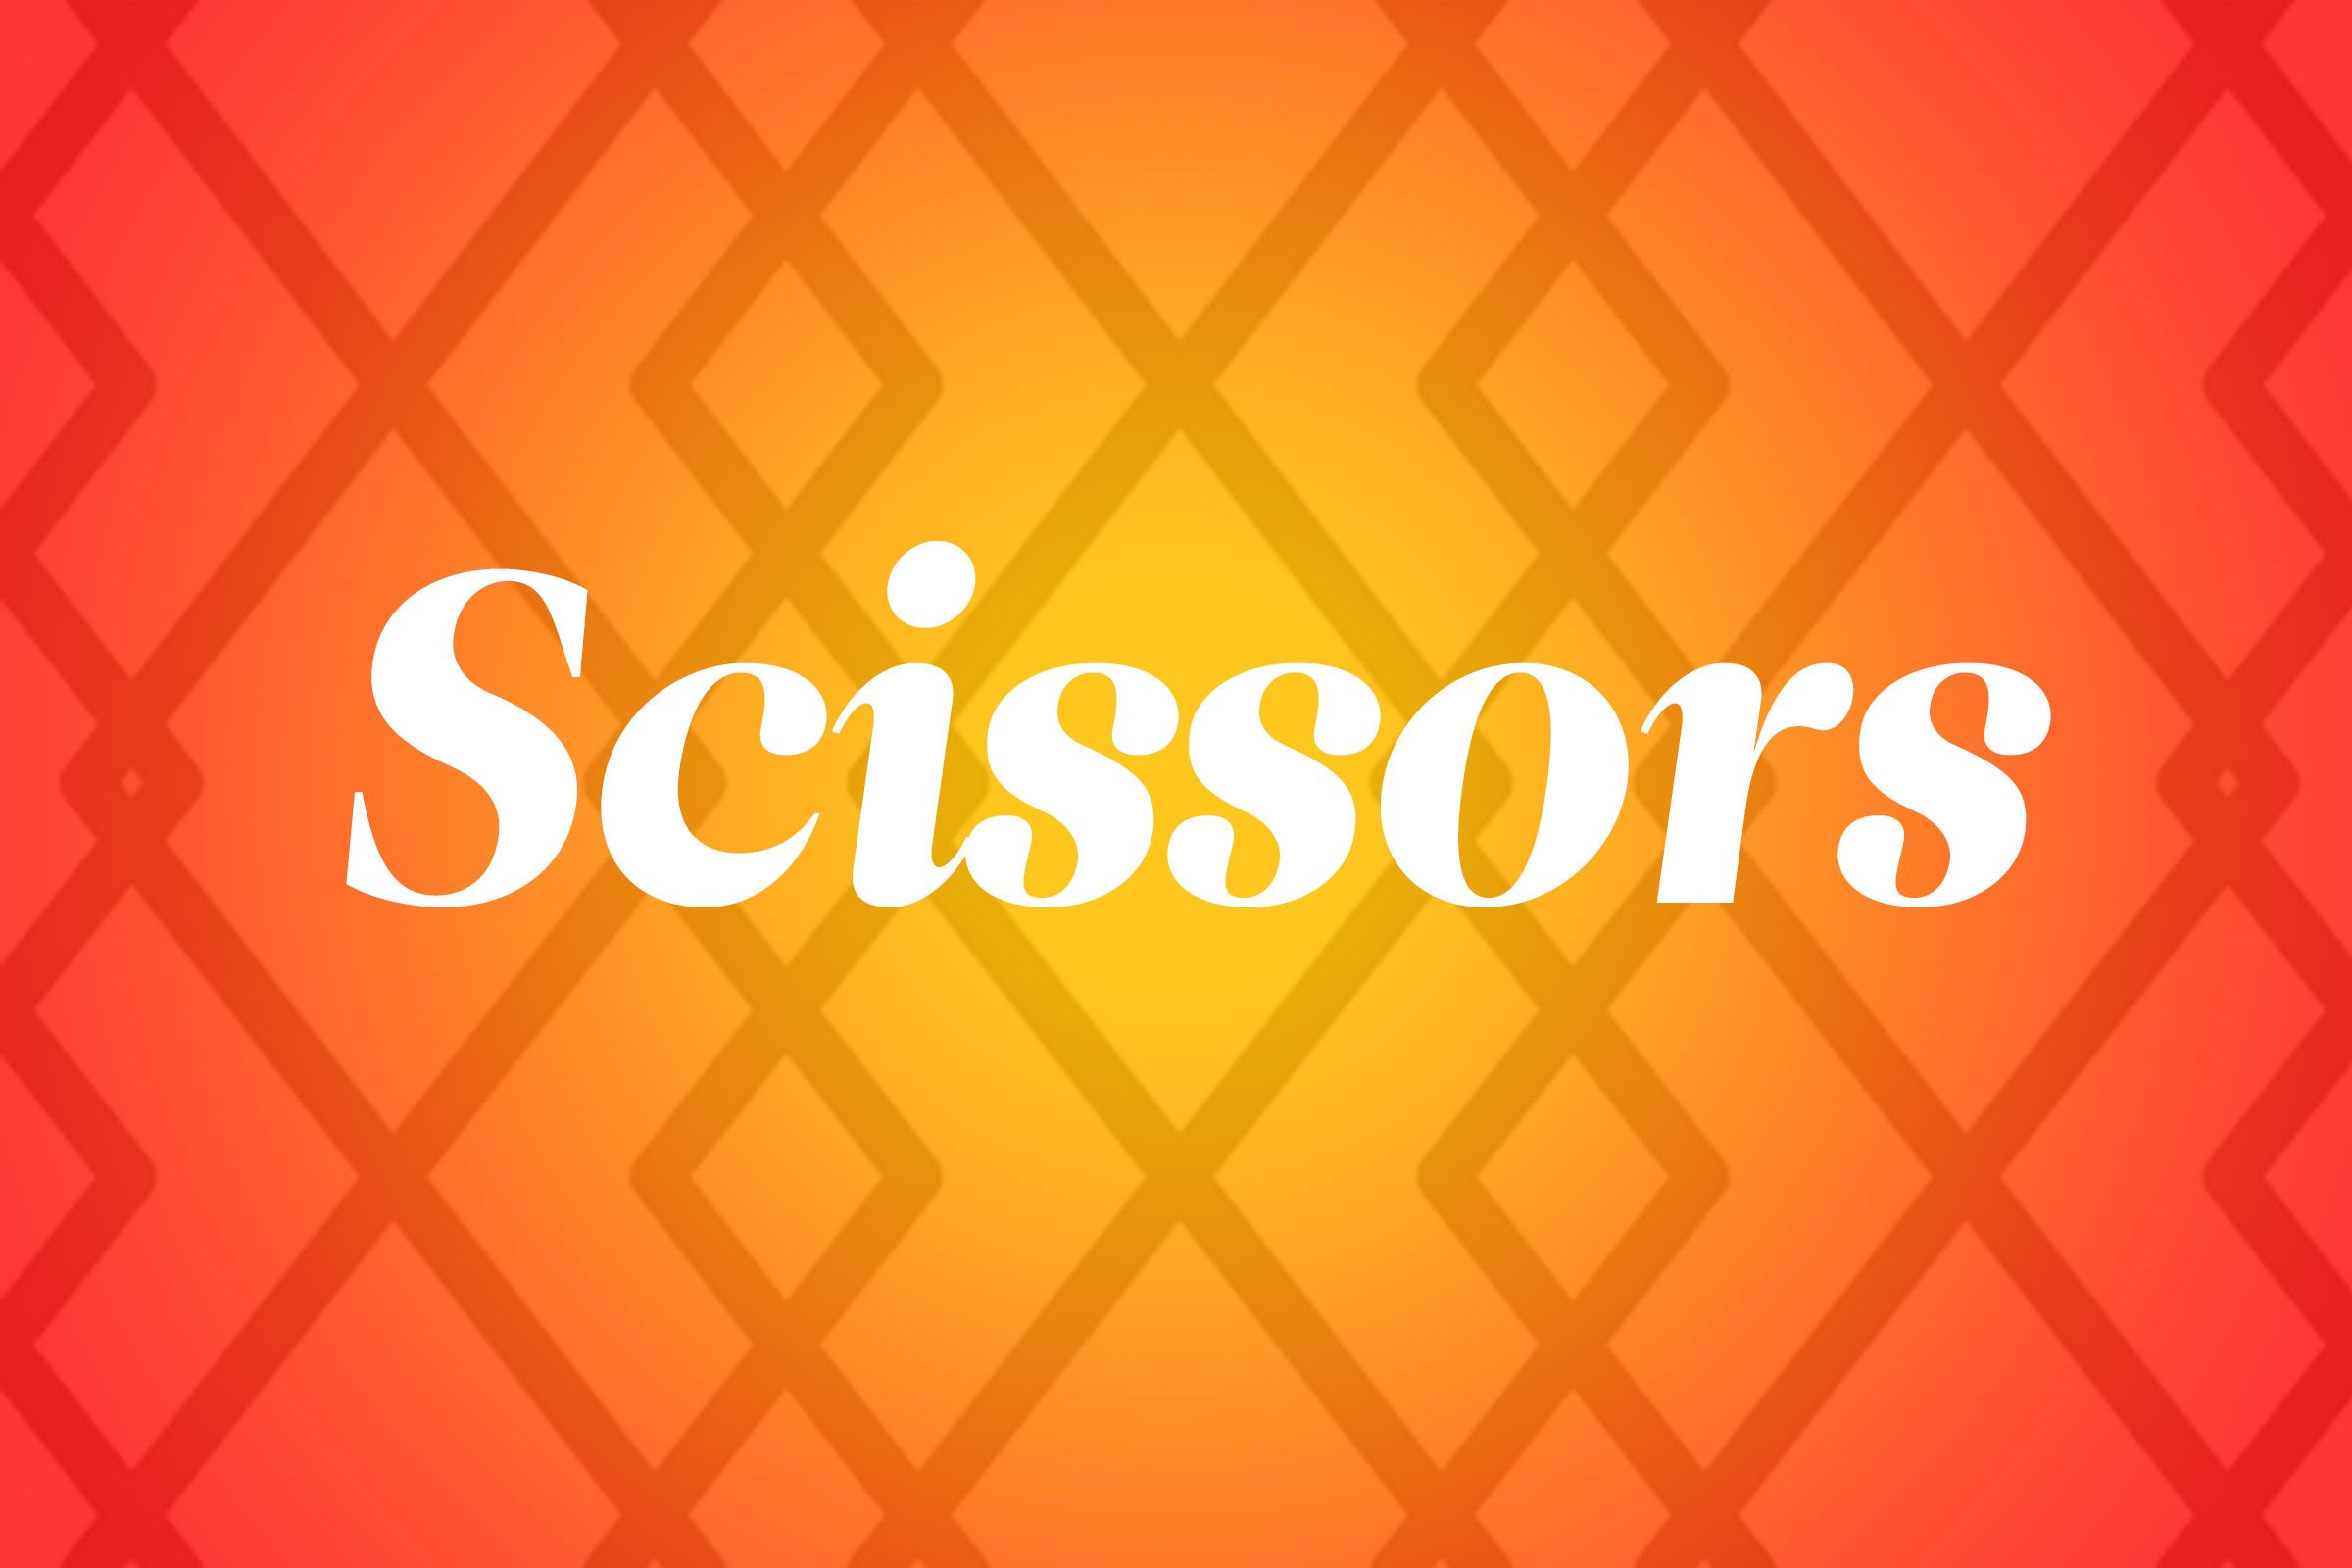 how to spell scissors in french